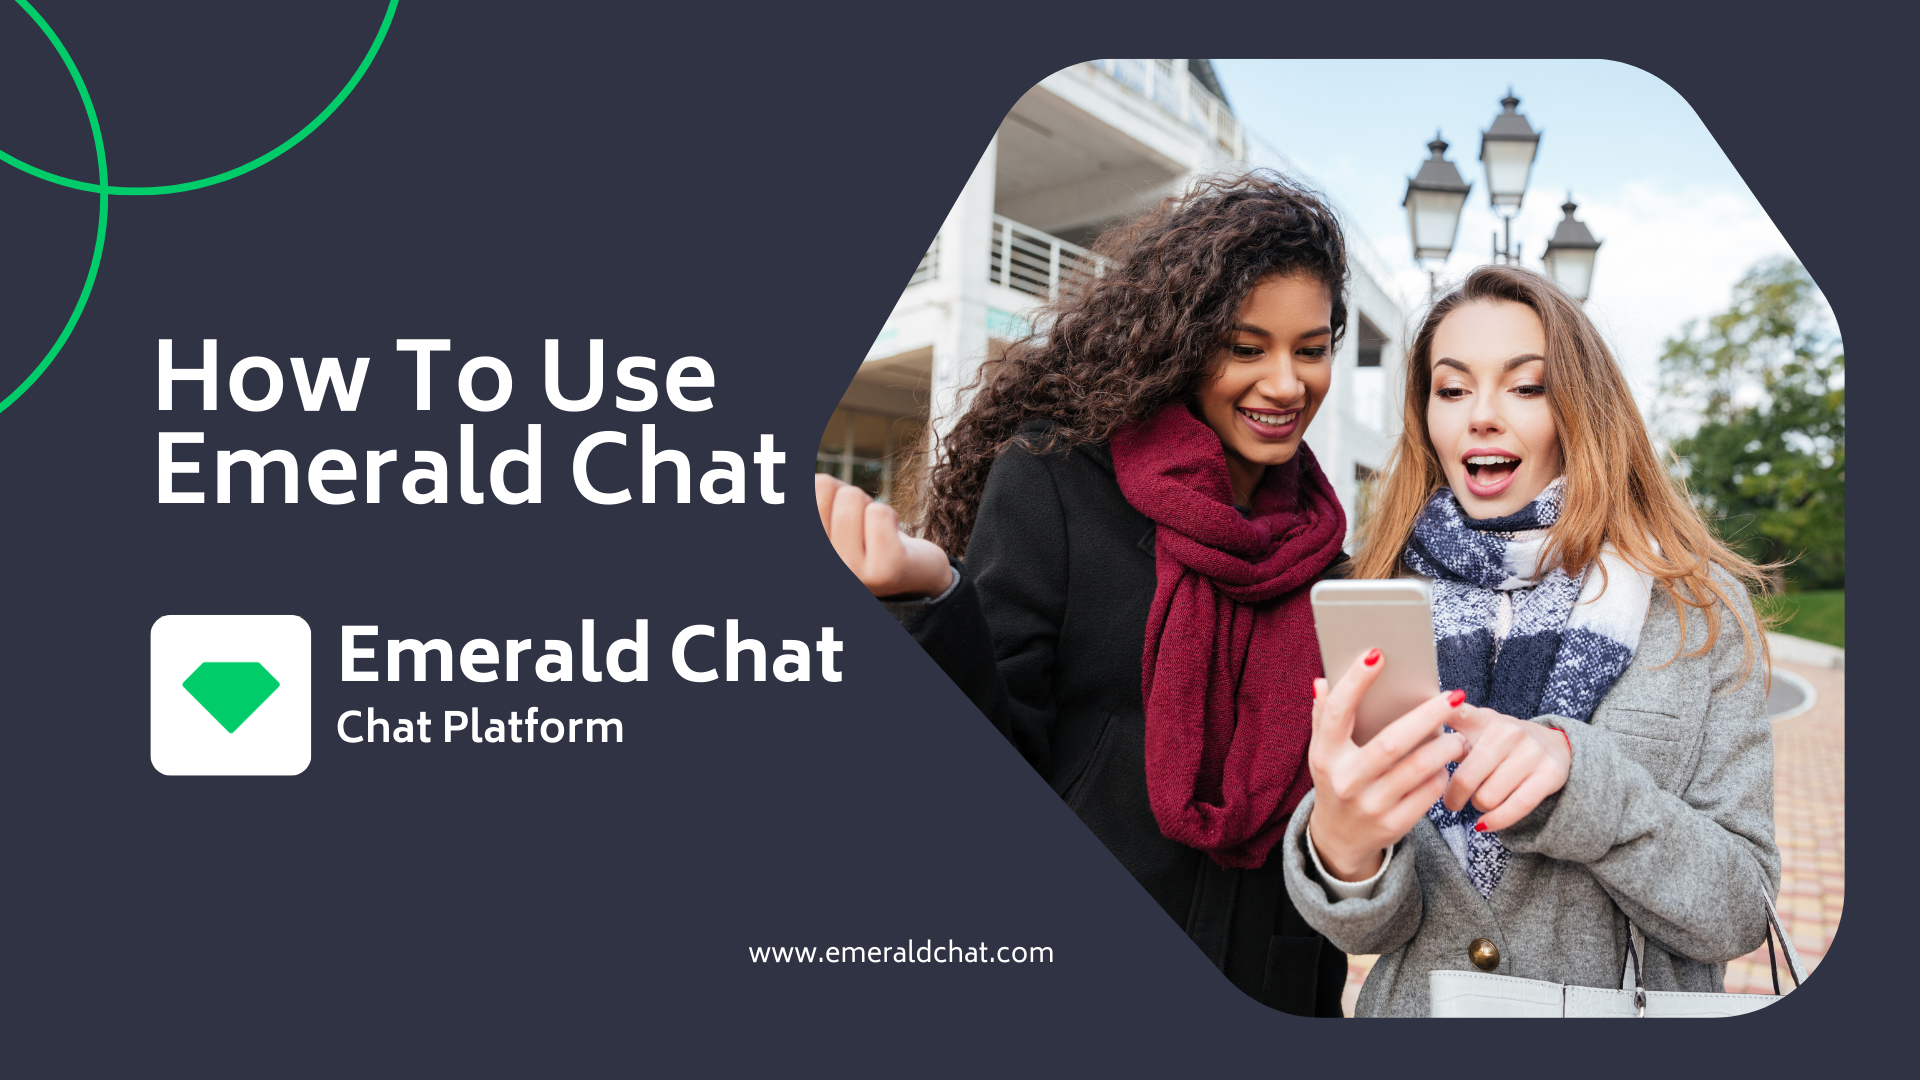 Learn How to Use Emerald Chat in Just 5 Steps – No Sign Up Required!